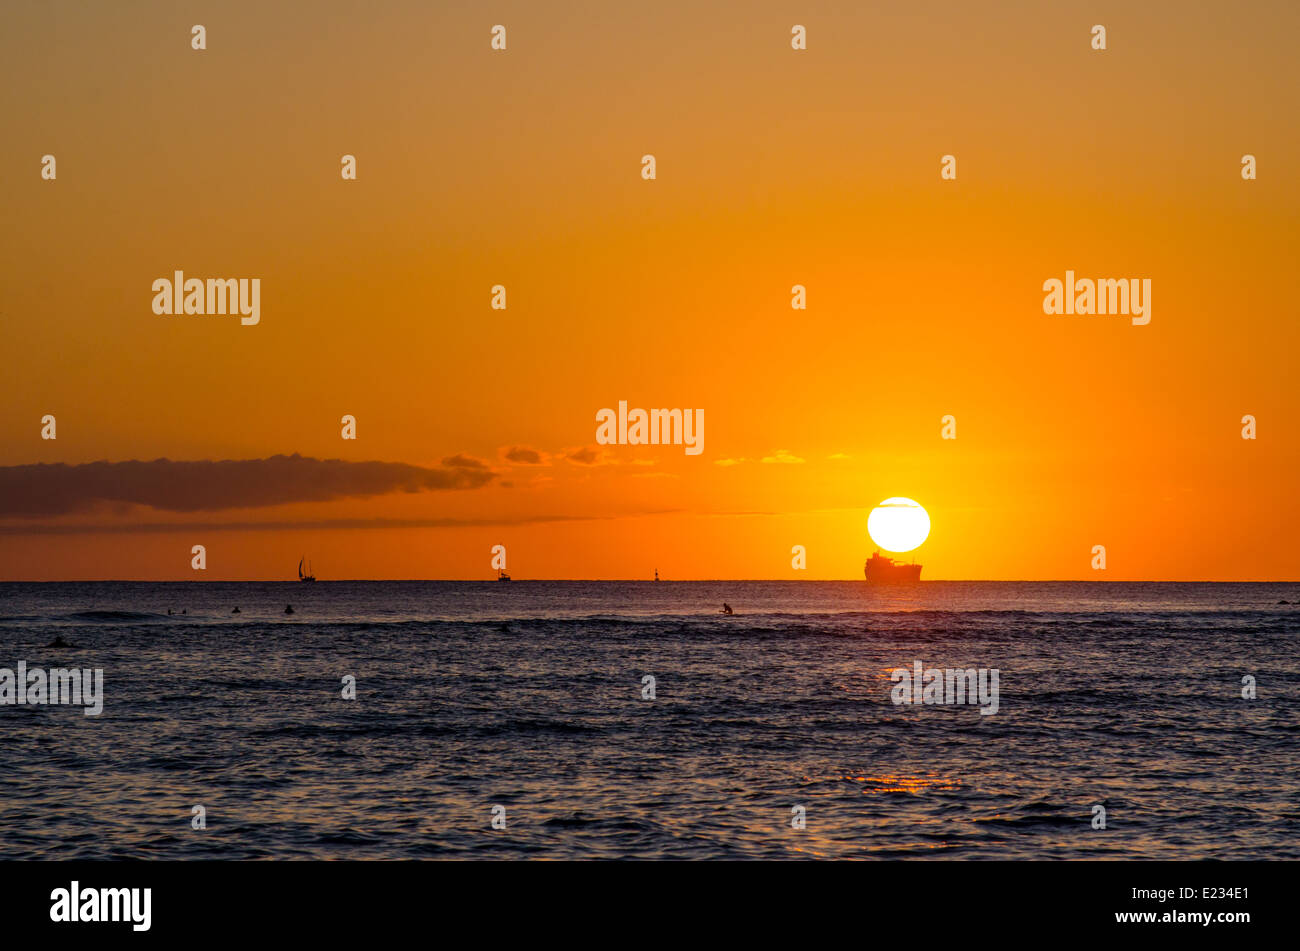 Sunset over the Pacific Ocean from Waikiki Beach in Hawaii, with a shipping tanker silhouetted against the setting sun Stock Photo